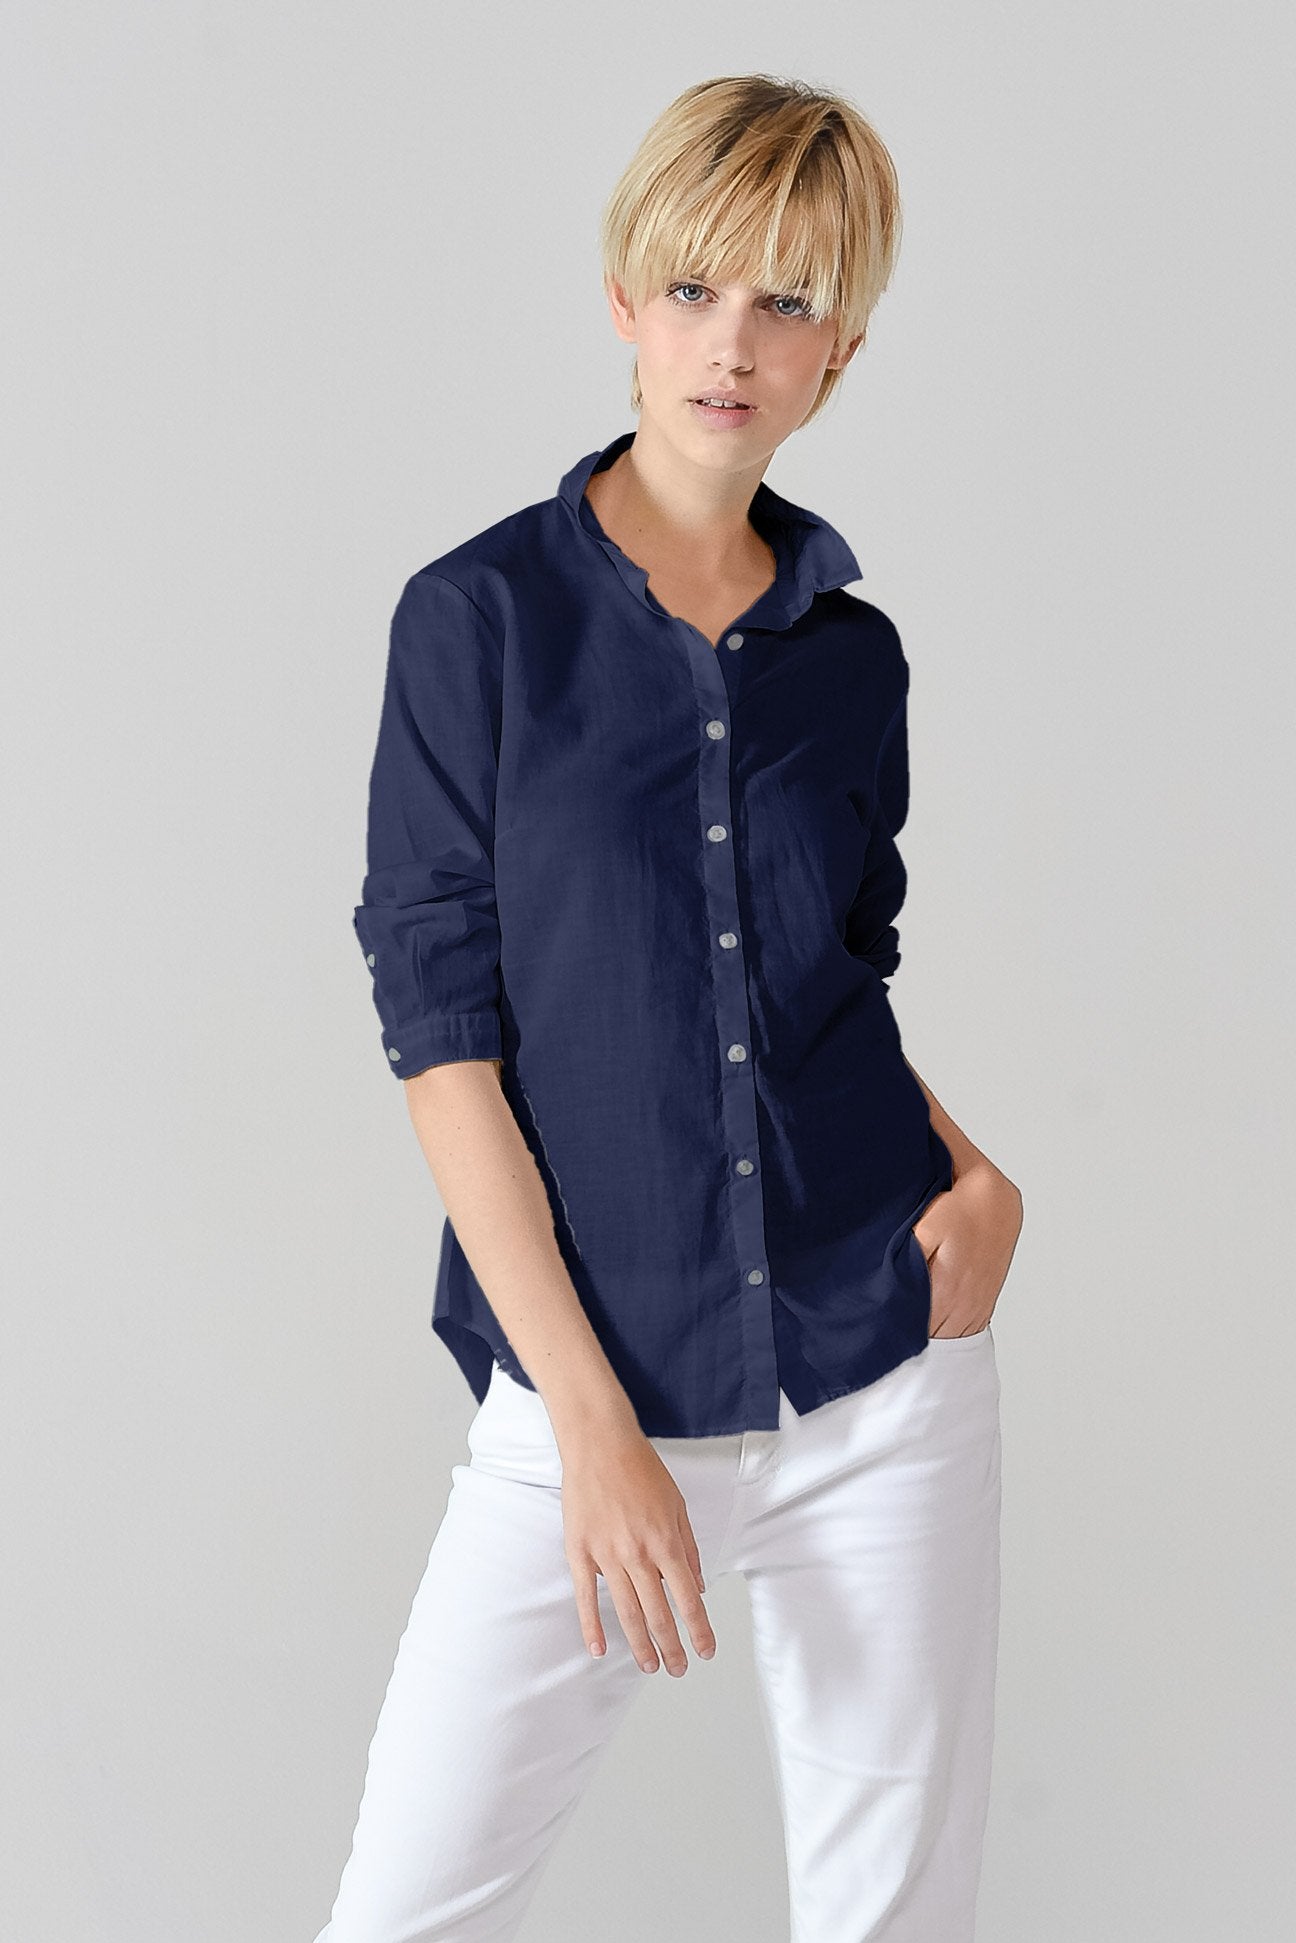 3/4 Sleeve Voile Shirt - Navy - Shirts